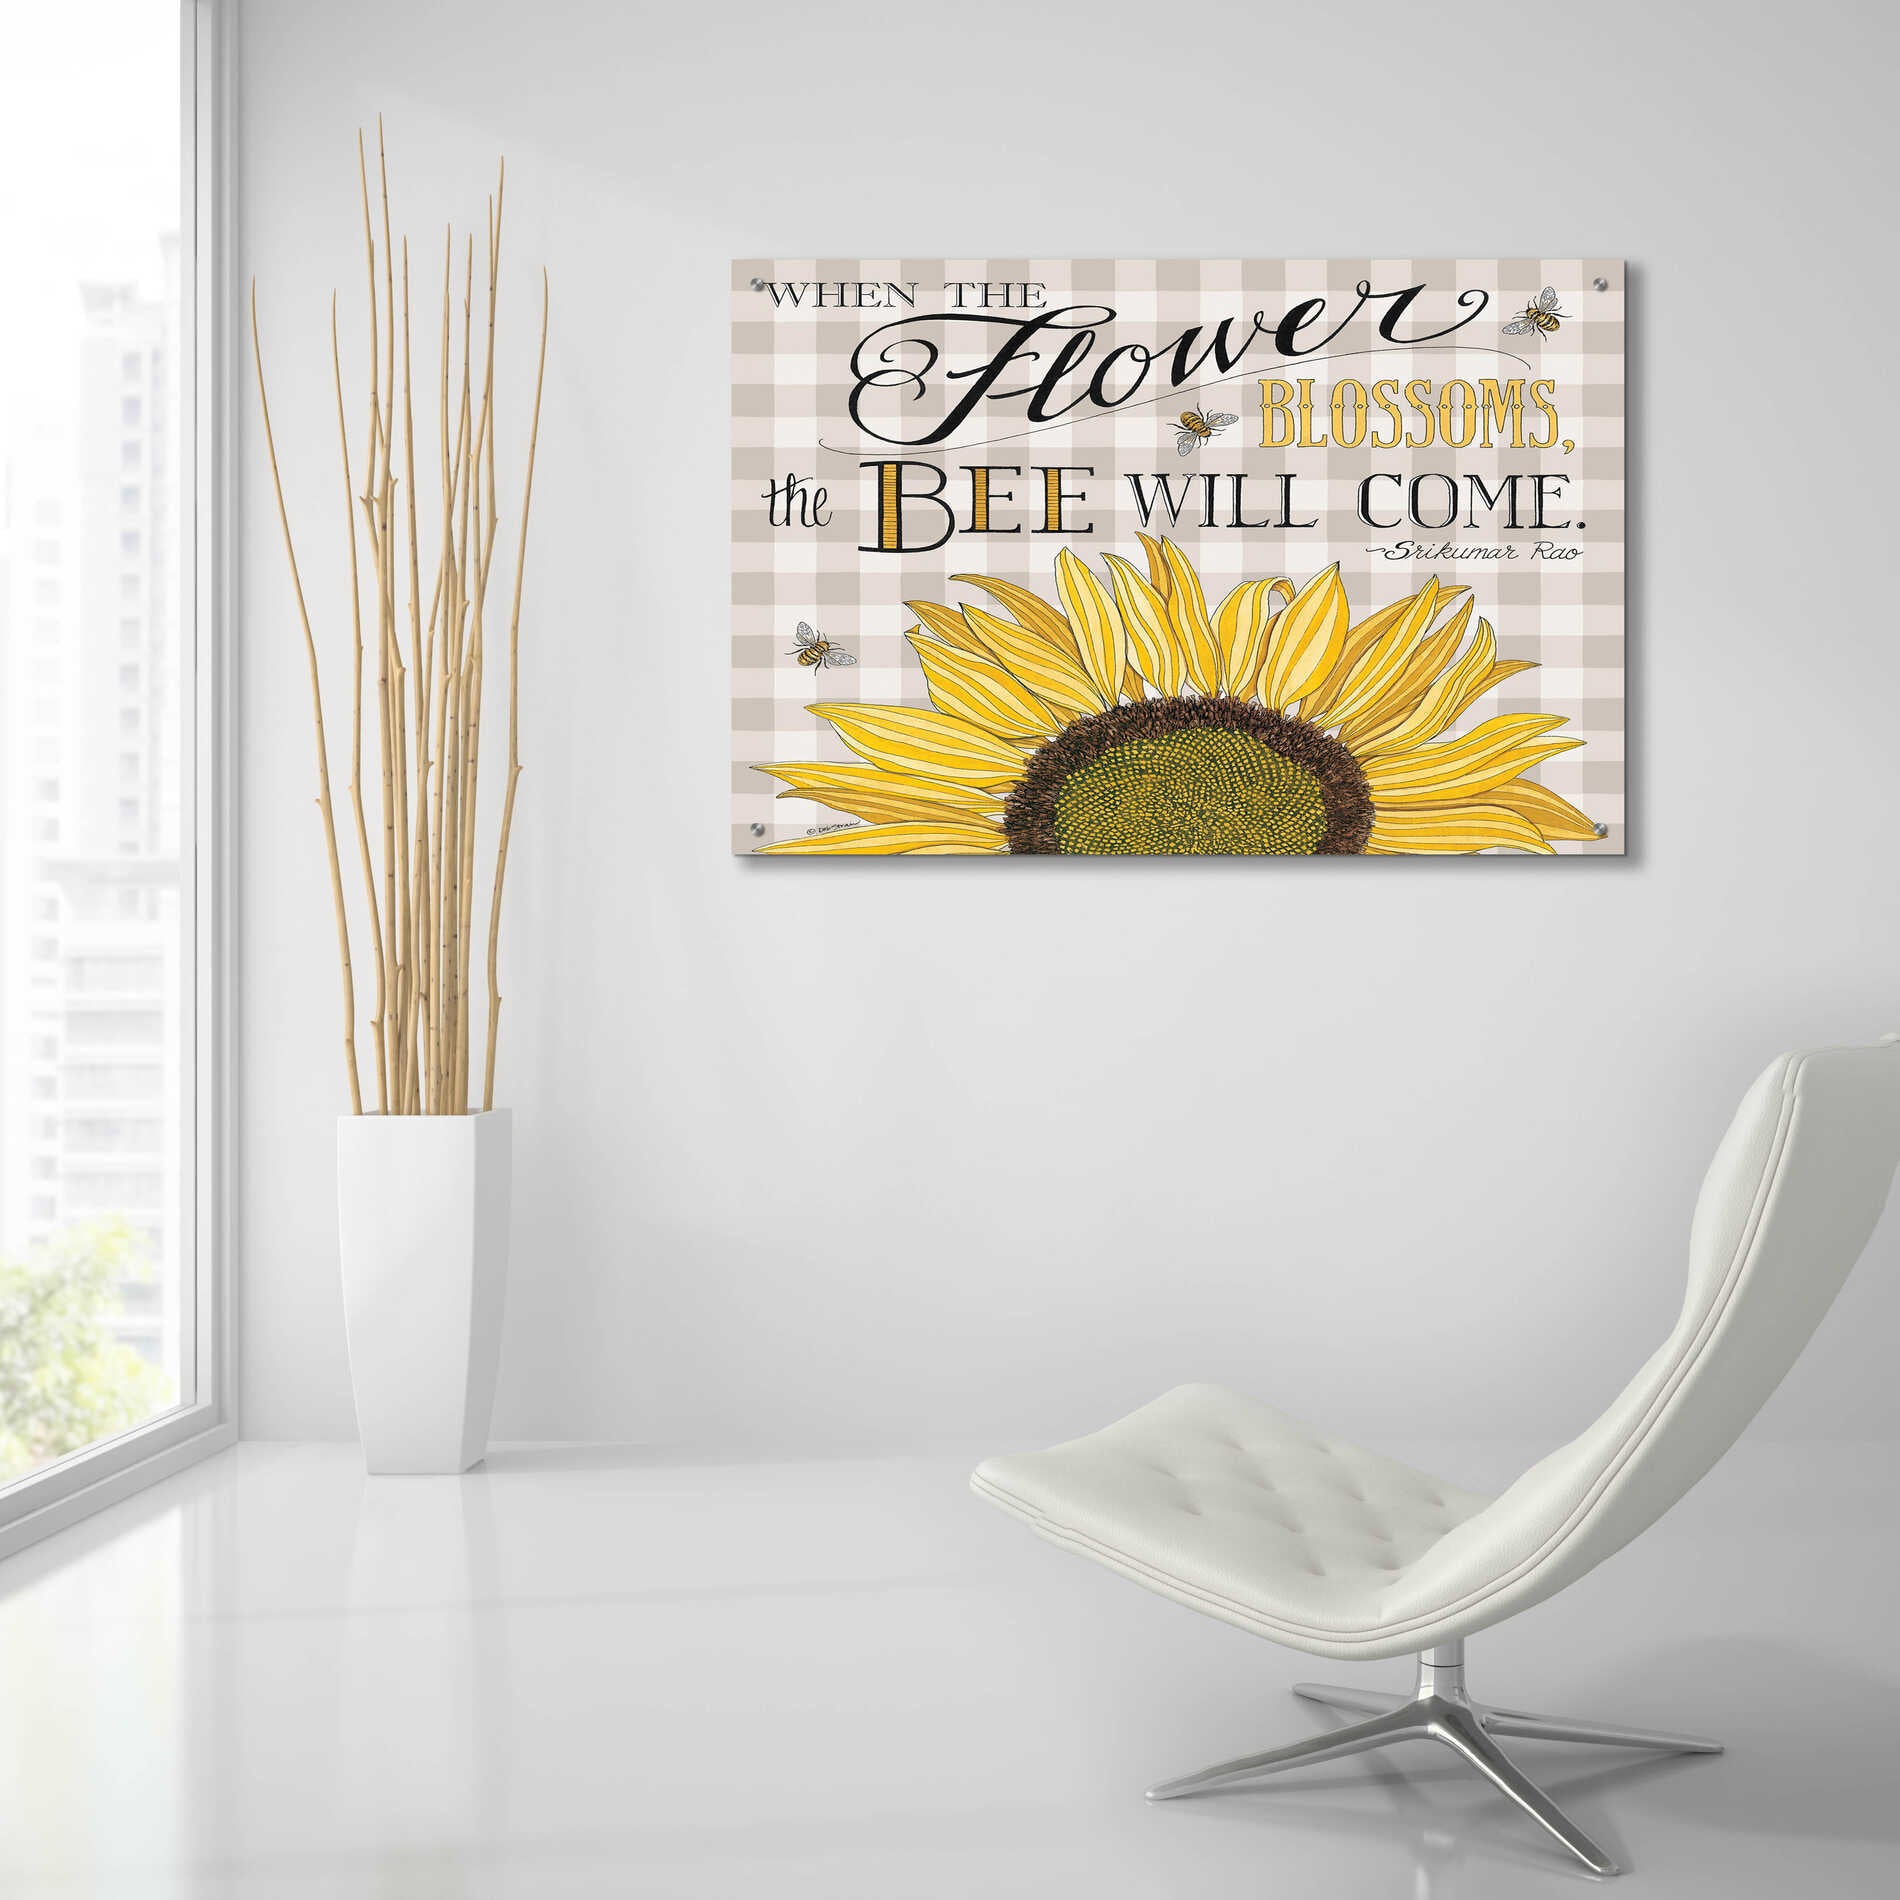 Epic Art 'When the Flower Blossoms' by Deb Strain, Acrylic Glass Wall Art,36x24